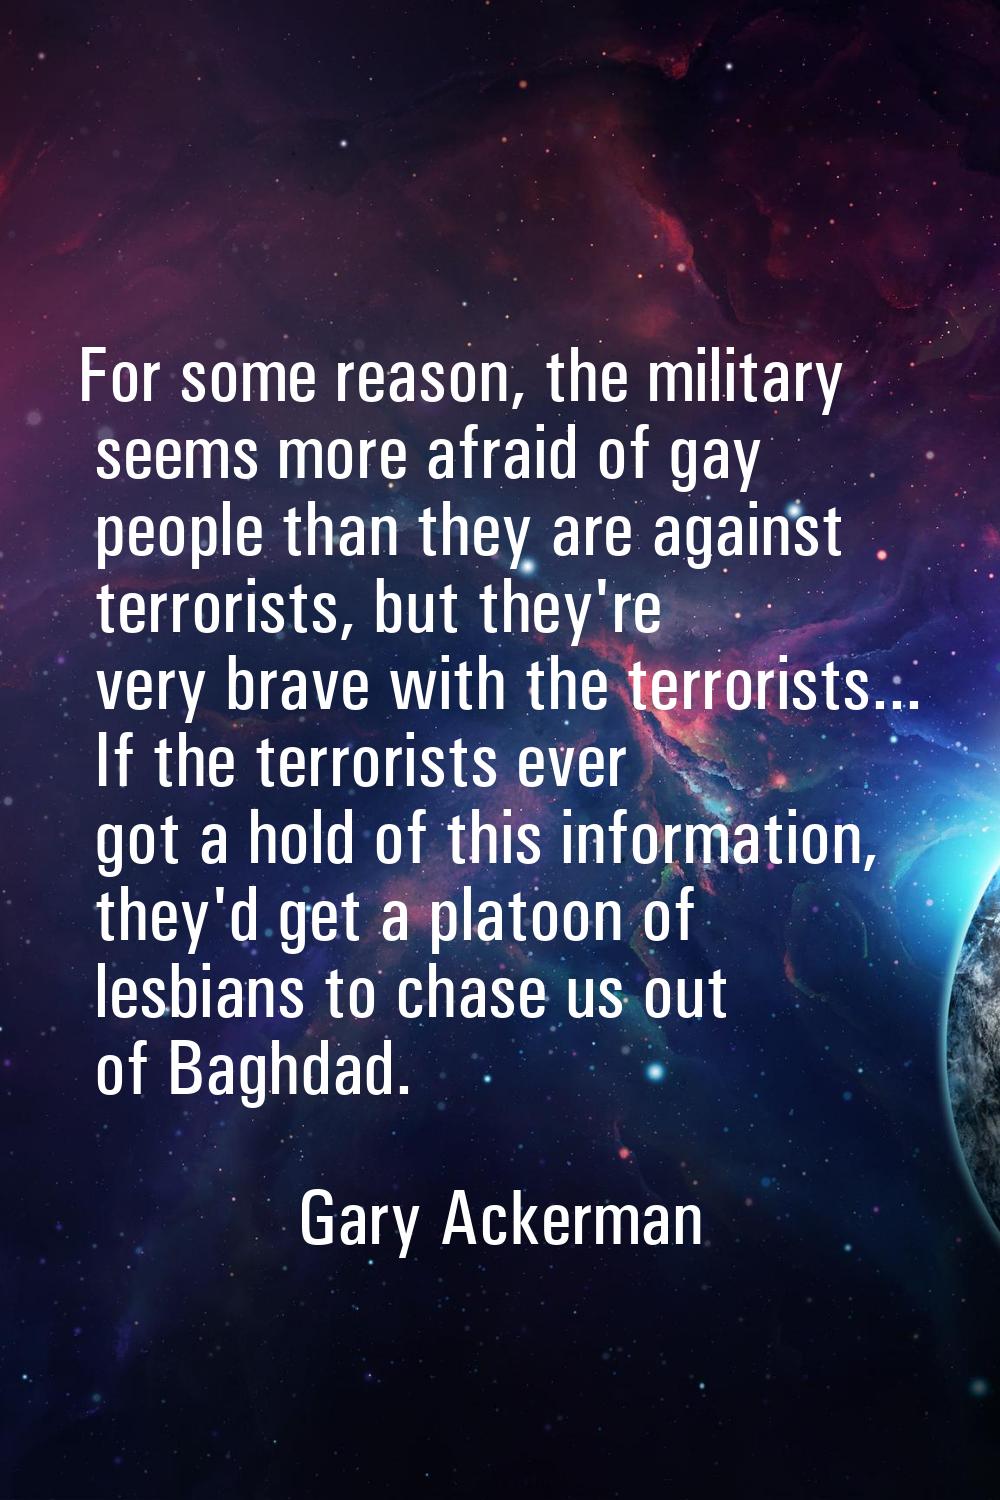 For some reason, the military seems more afraid of gay people than they are against terrorists, but